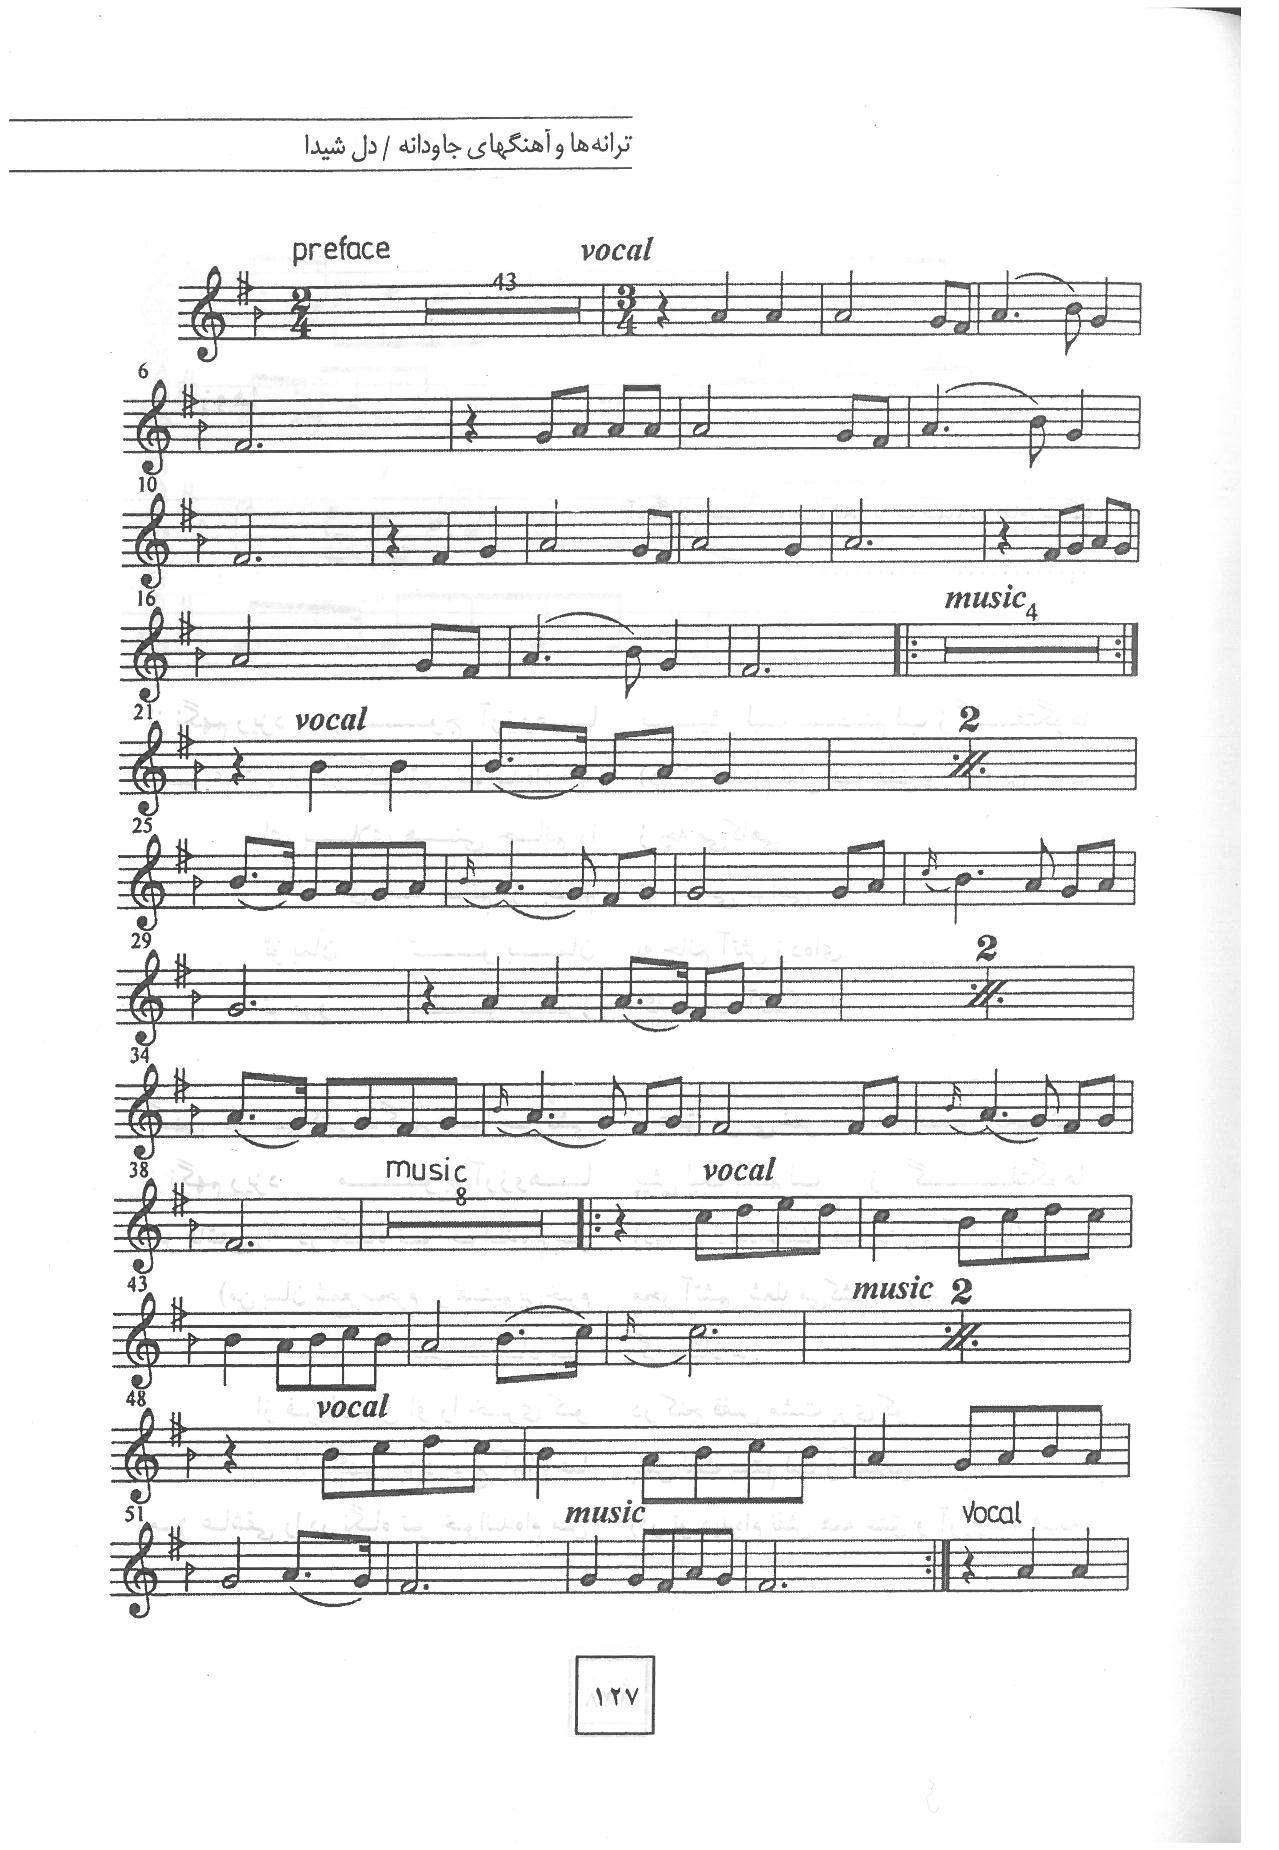 A sheet music with many different notes on it.